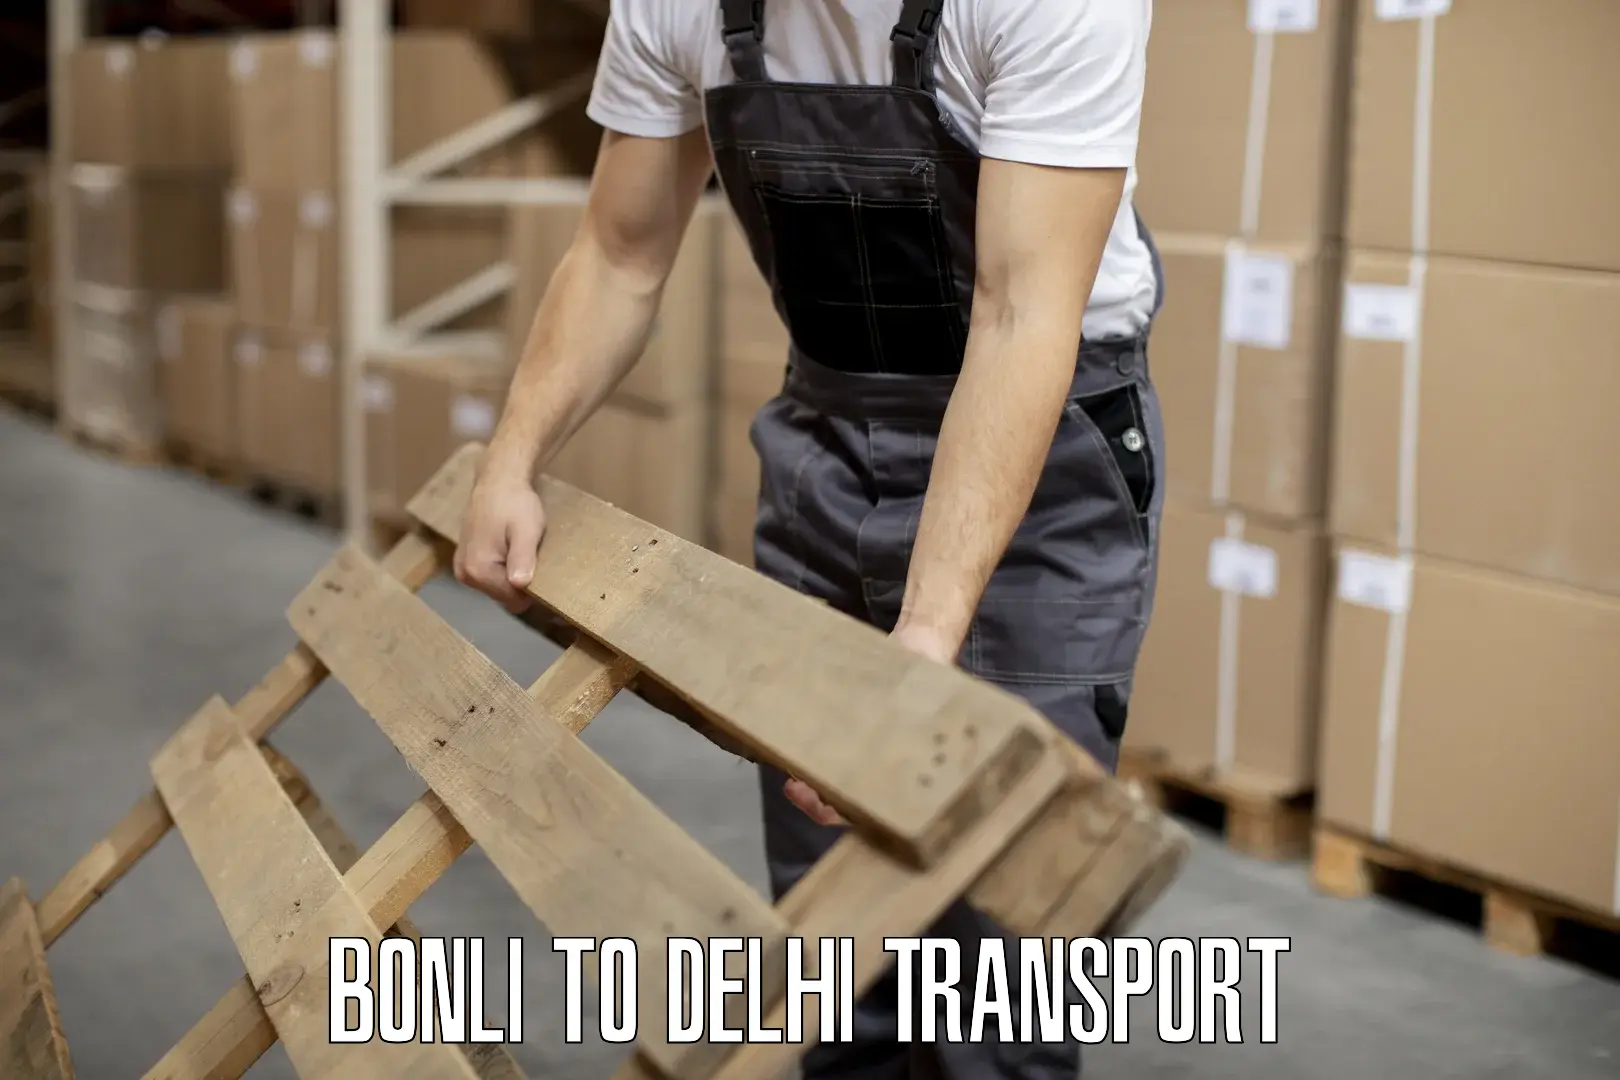 Domestic transport services Bonli to NCR